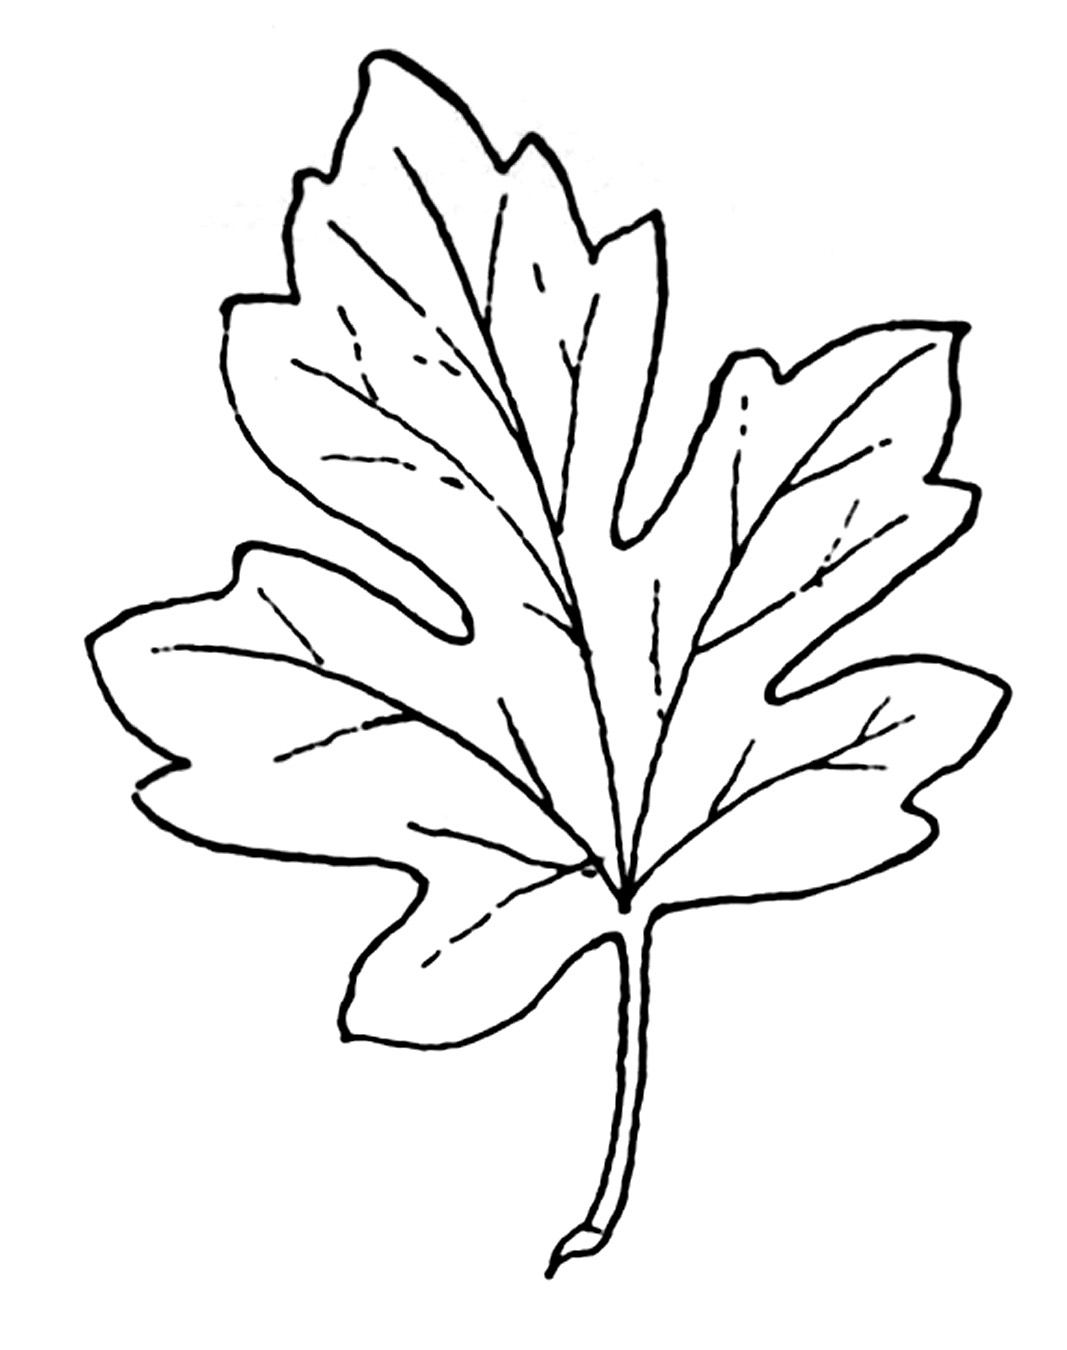 Leaves  black and white black and white leaf clipart clipartfest